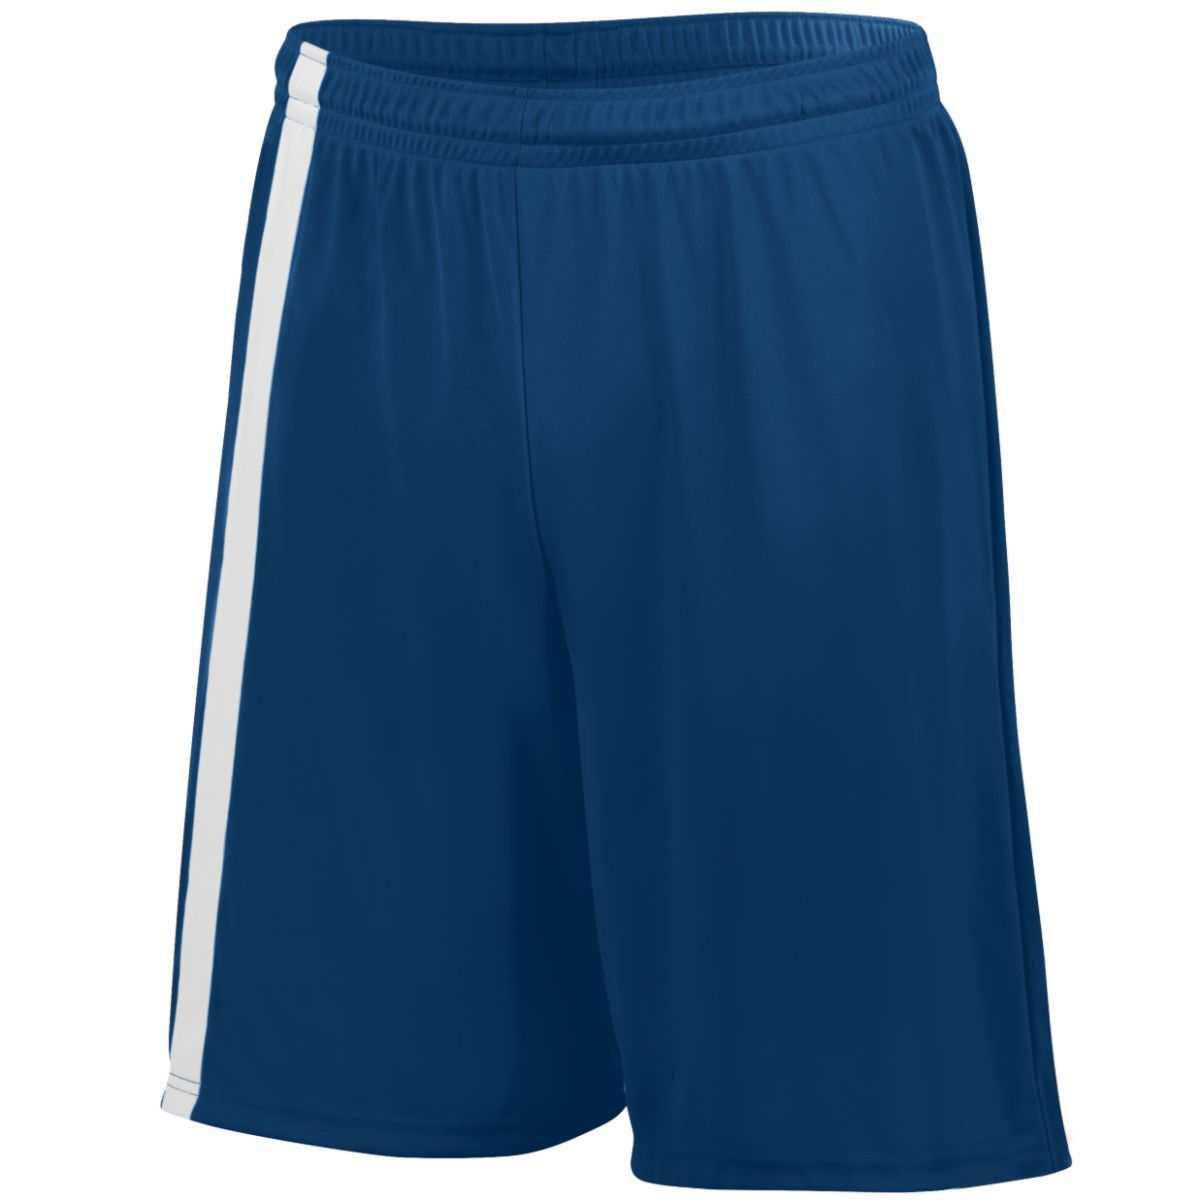 Augusta Sportswear Youth Attacking Third Shorts in Navy/White  -Part of the Youth, Youth-Shorts, Augusta-Products, Soccer, All-Sports-1 product lines at KanaleyCreations.com